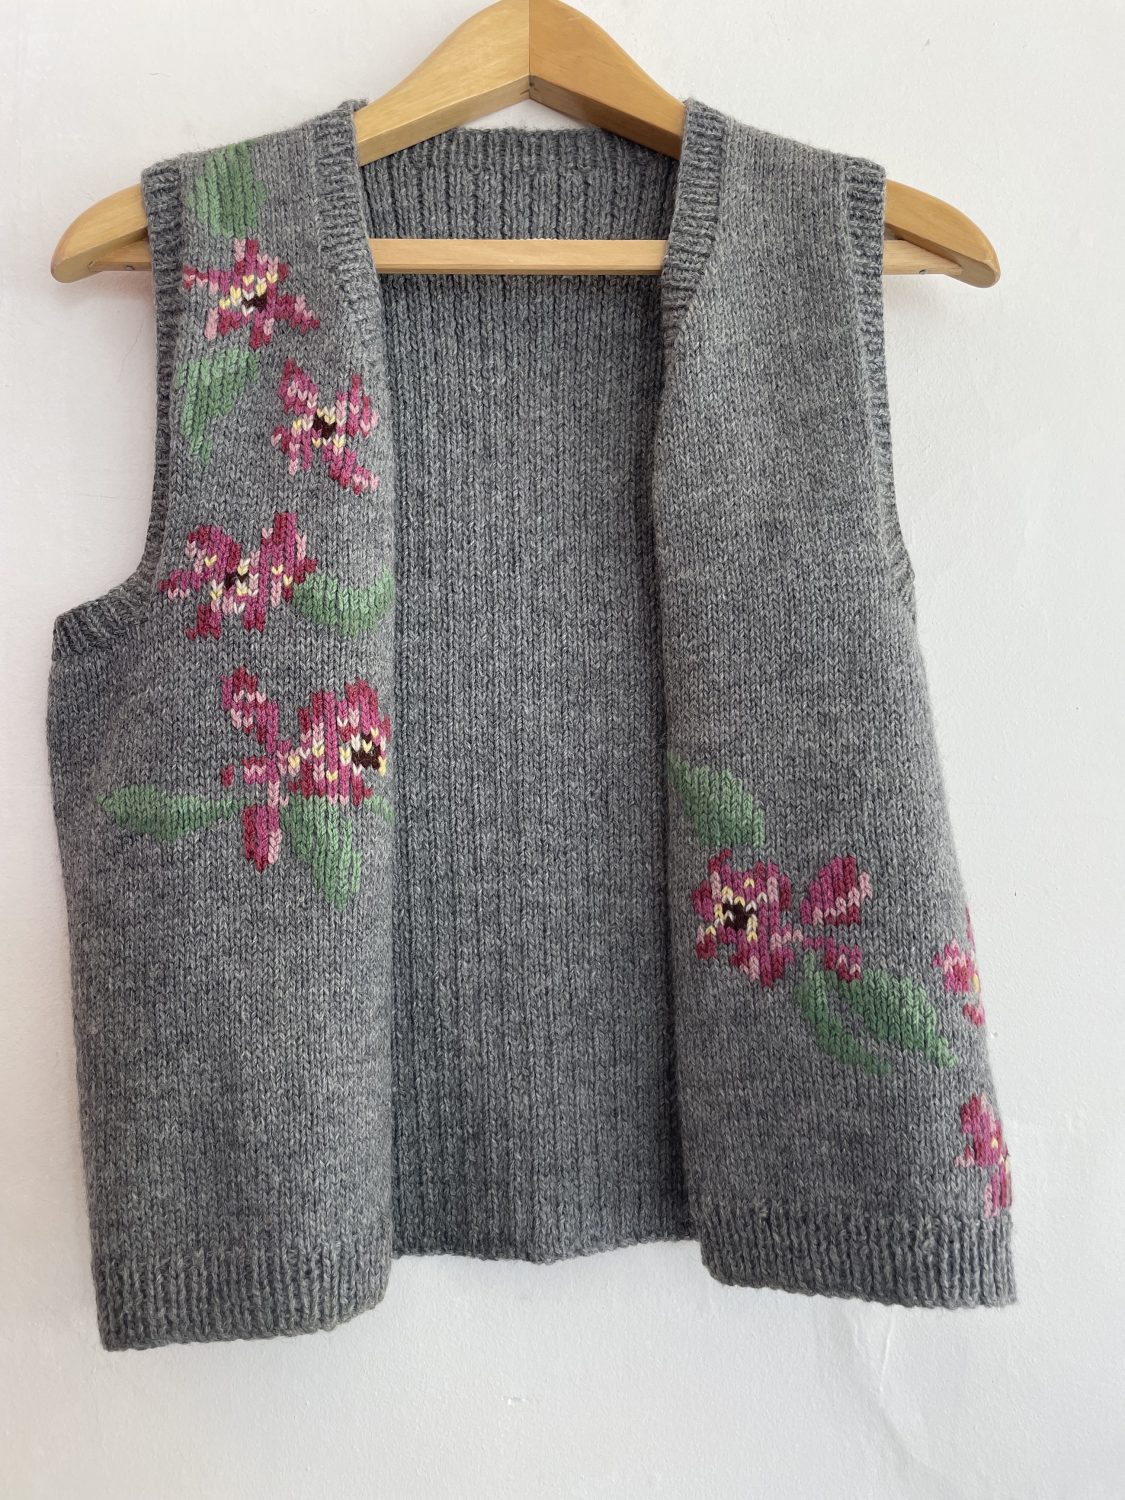 70's HAND KNITTED GREY WOOL VEST WITH FLORAL DESIGN | Chaos Bazaar Vintage